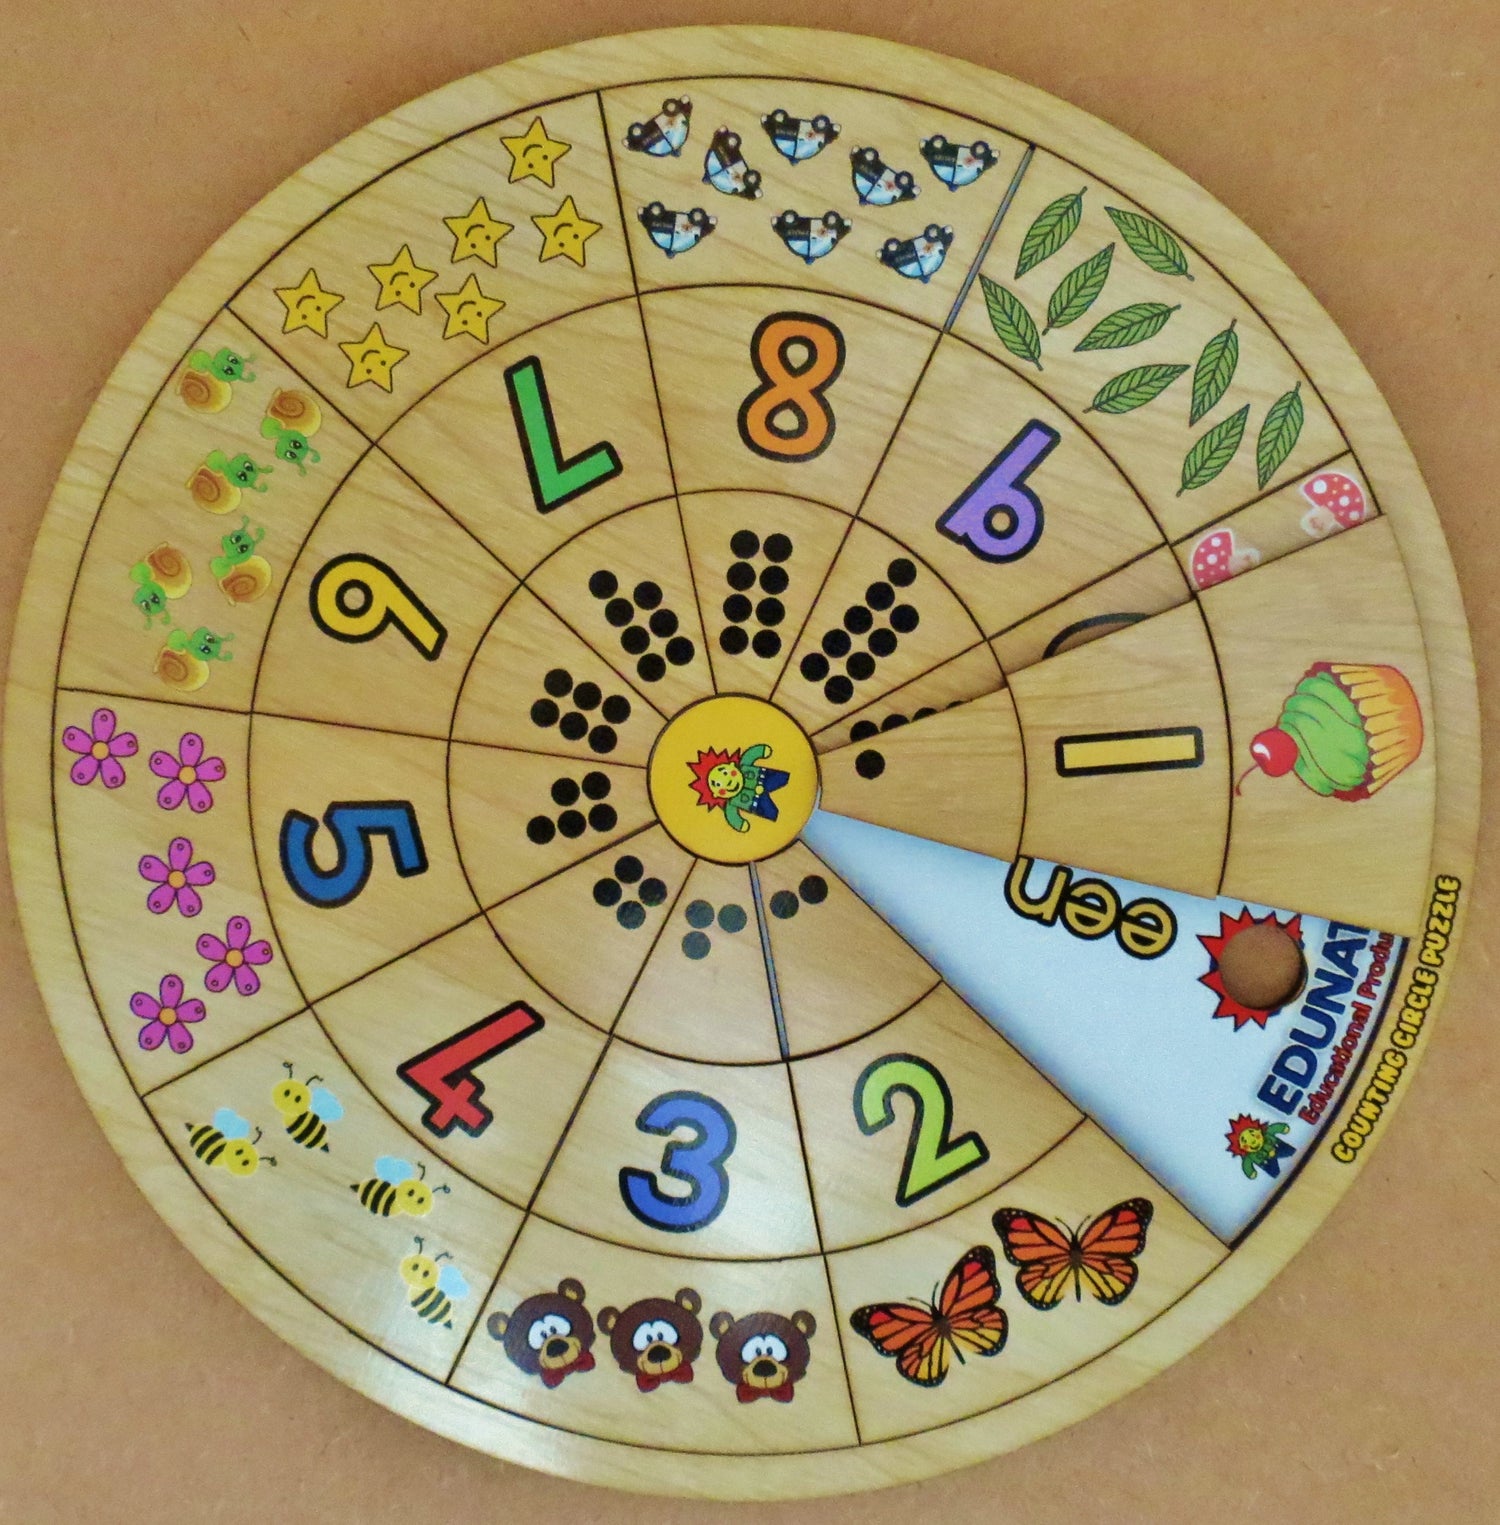 Counting Circle Puzzle - Afrikaans Edunation South Africa Maths & Numeracy